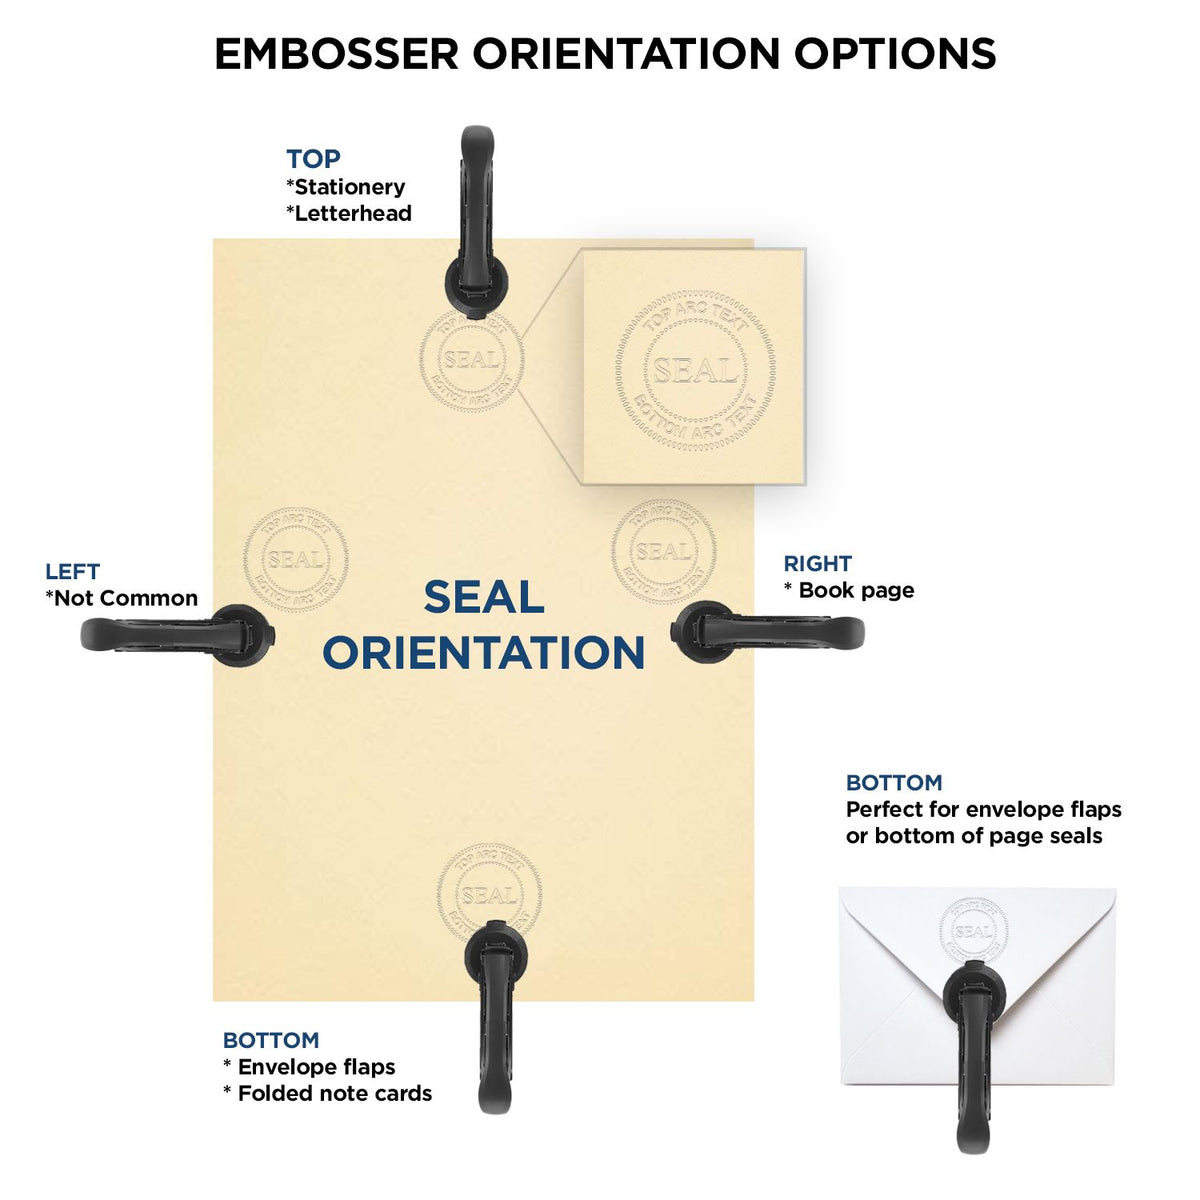 An infographic for the Handheld Vermont Professional Geologist Embosser showing embosser orientation, this is showing examples of a top, bottom, right and left insert.